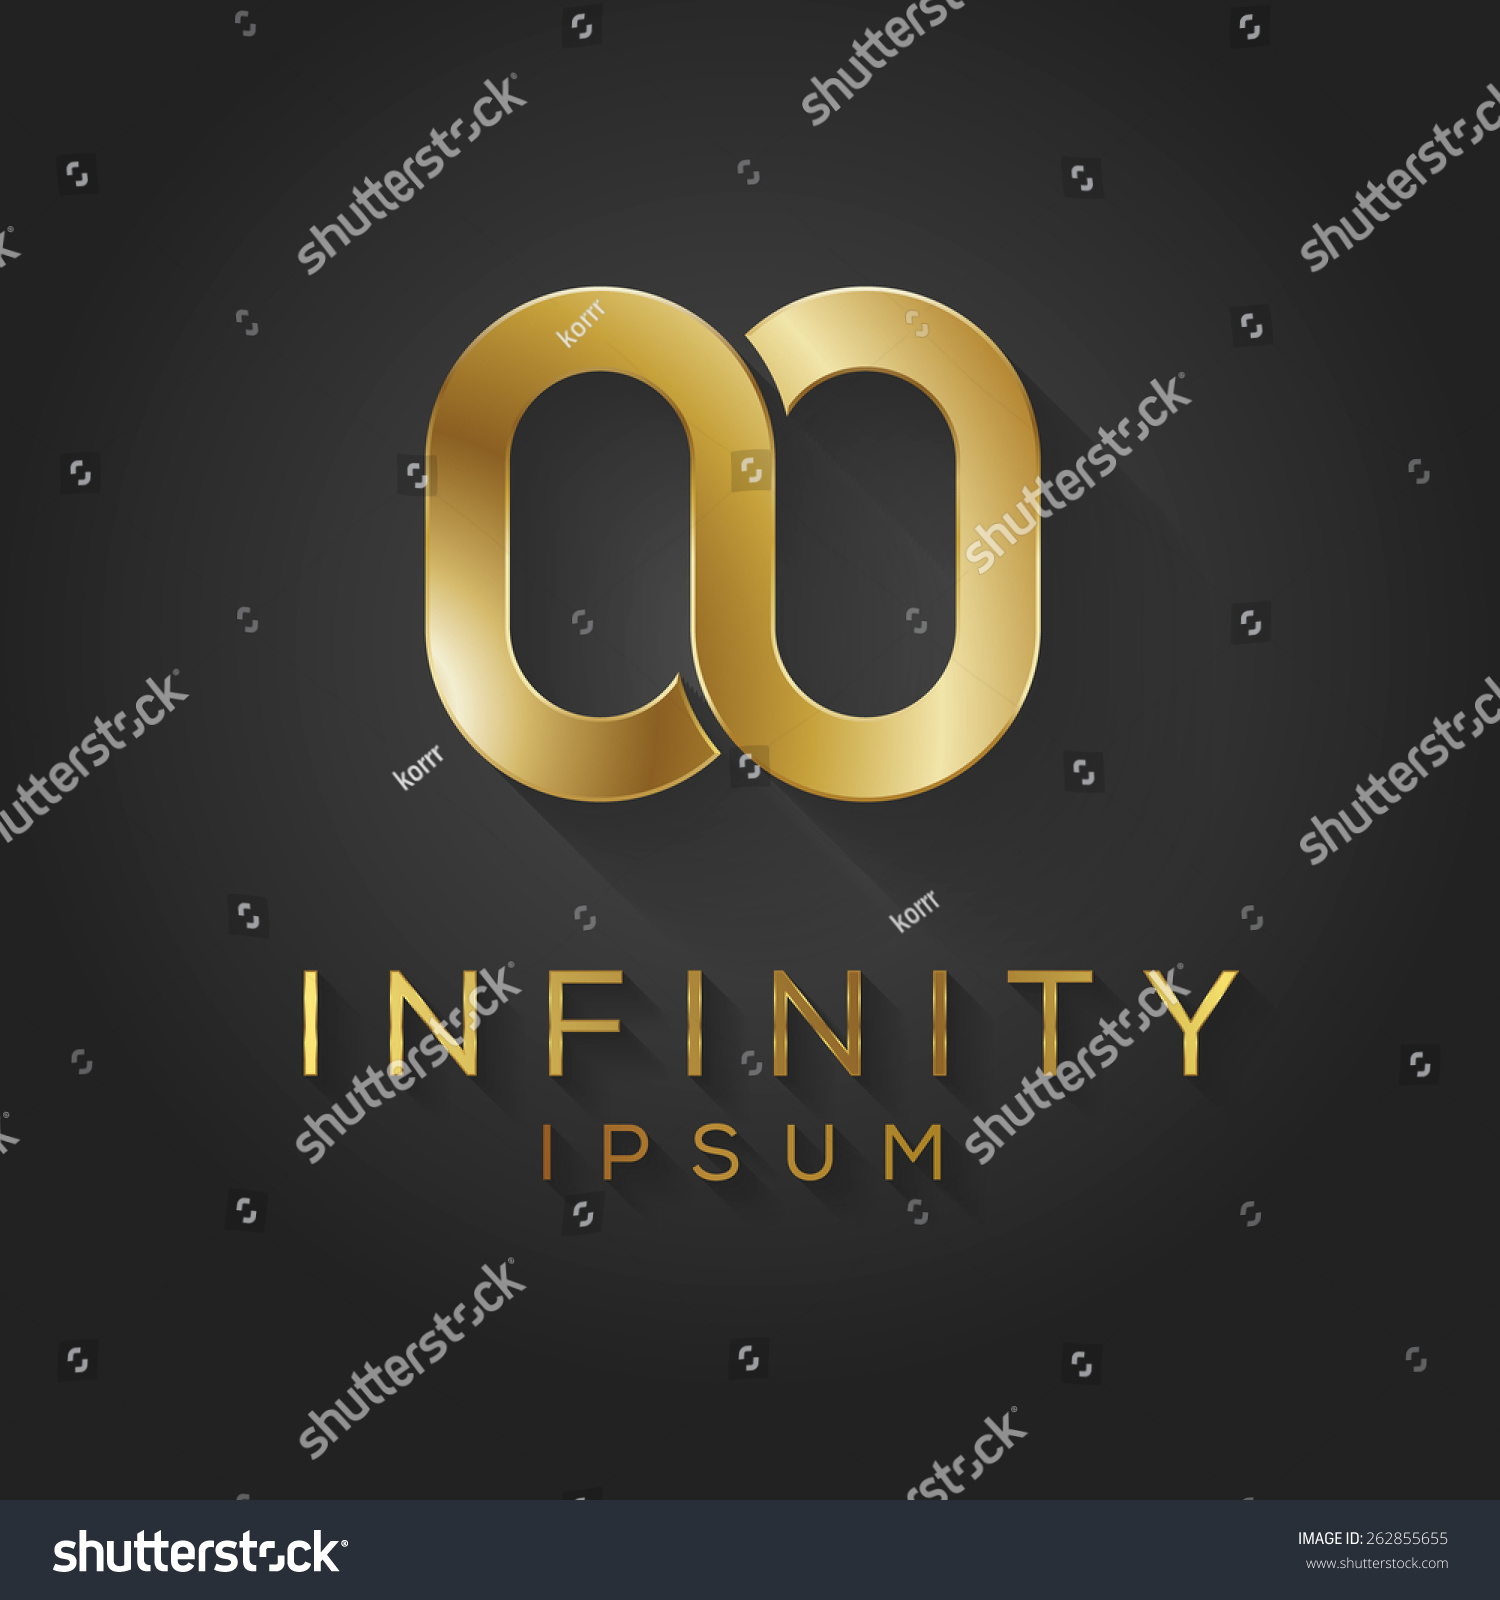 Gold Infinity Logo Template. Vector Graphic Element. - 262855655 ...